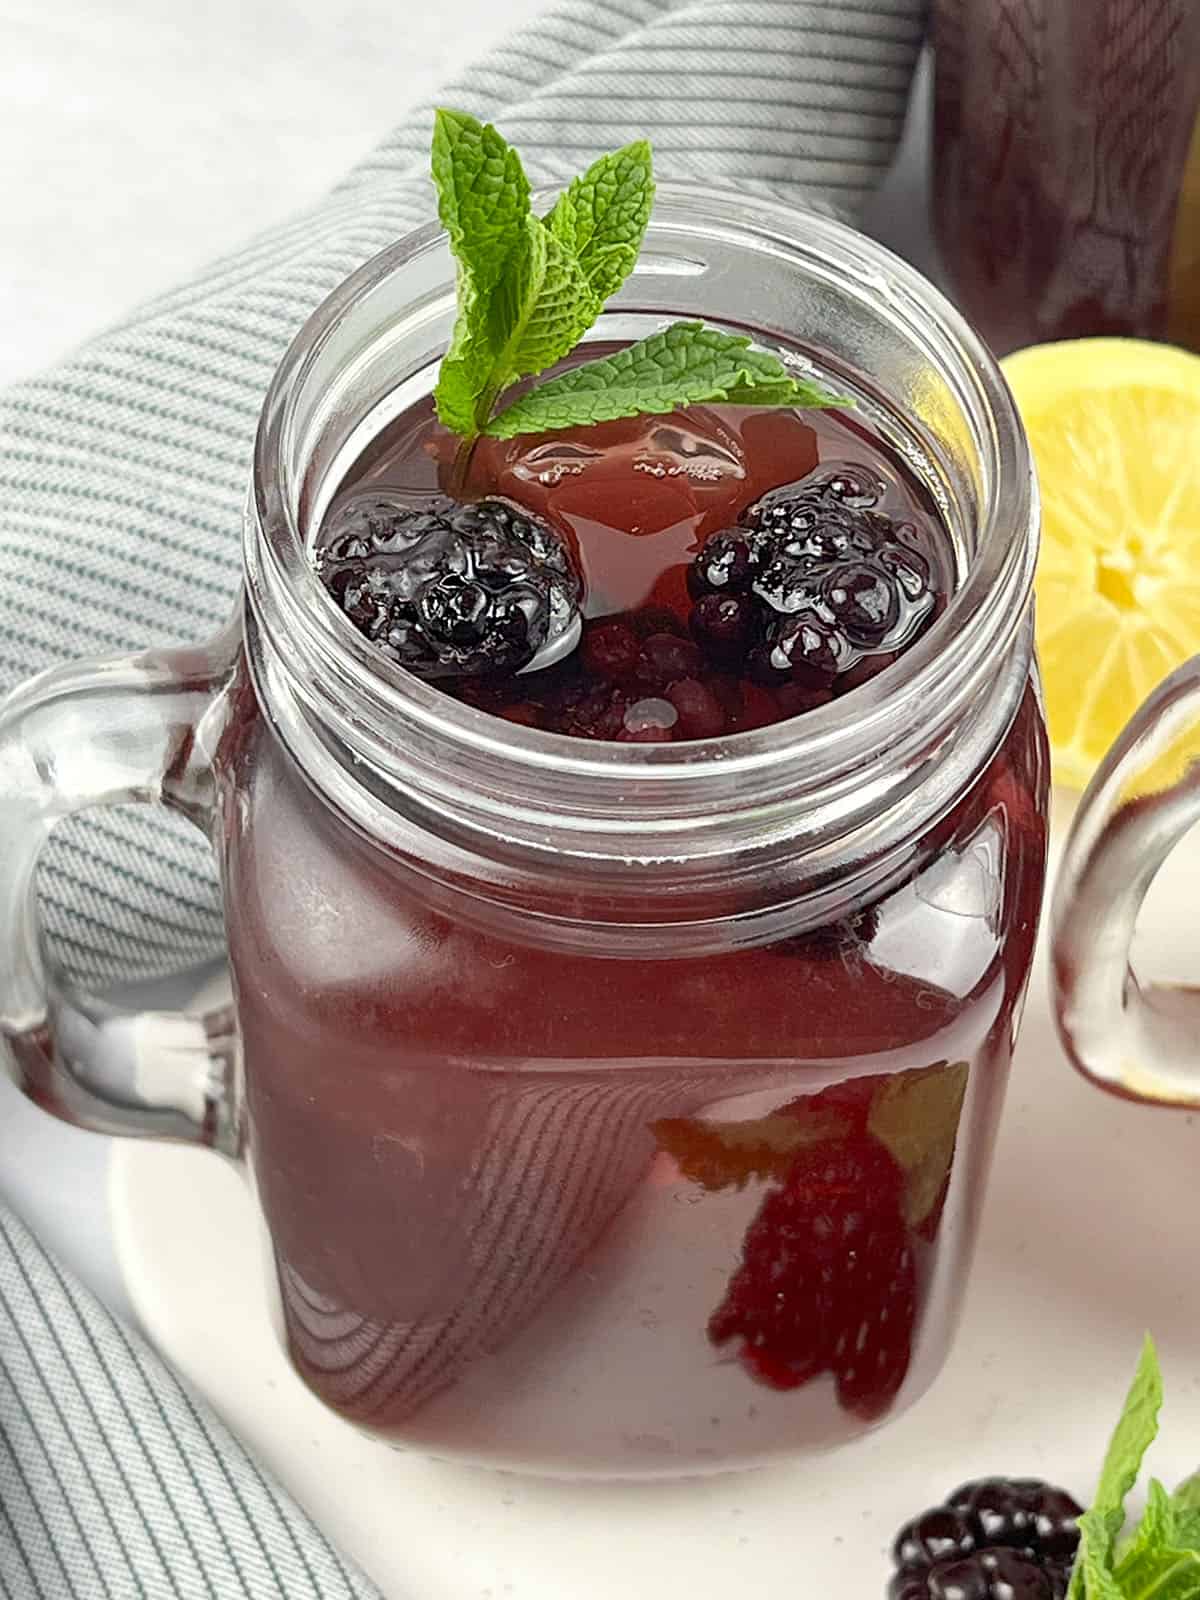 One glass of sweet tea with blackberries on a white tray. There is a lemon in the background on the right.